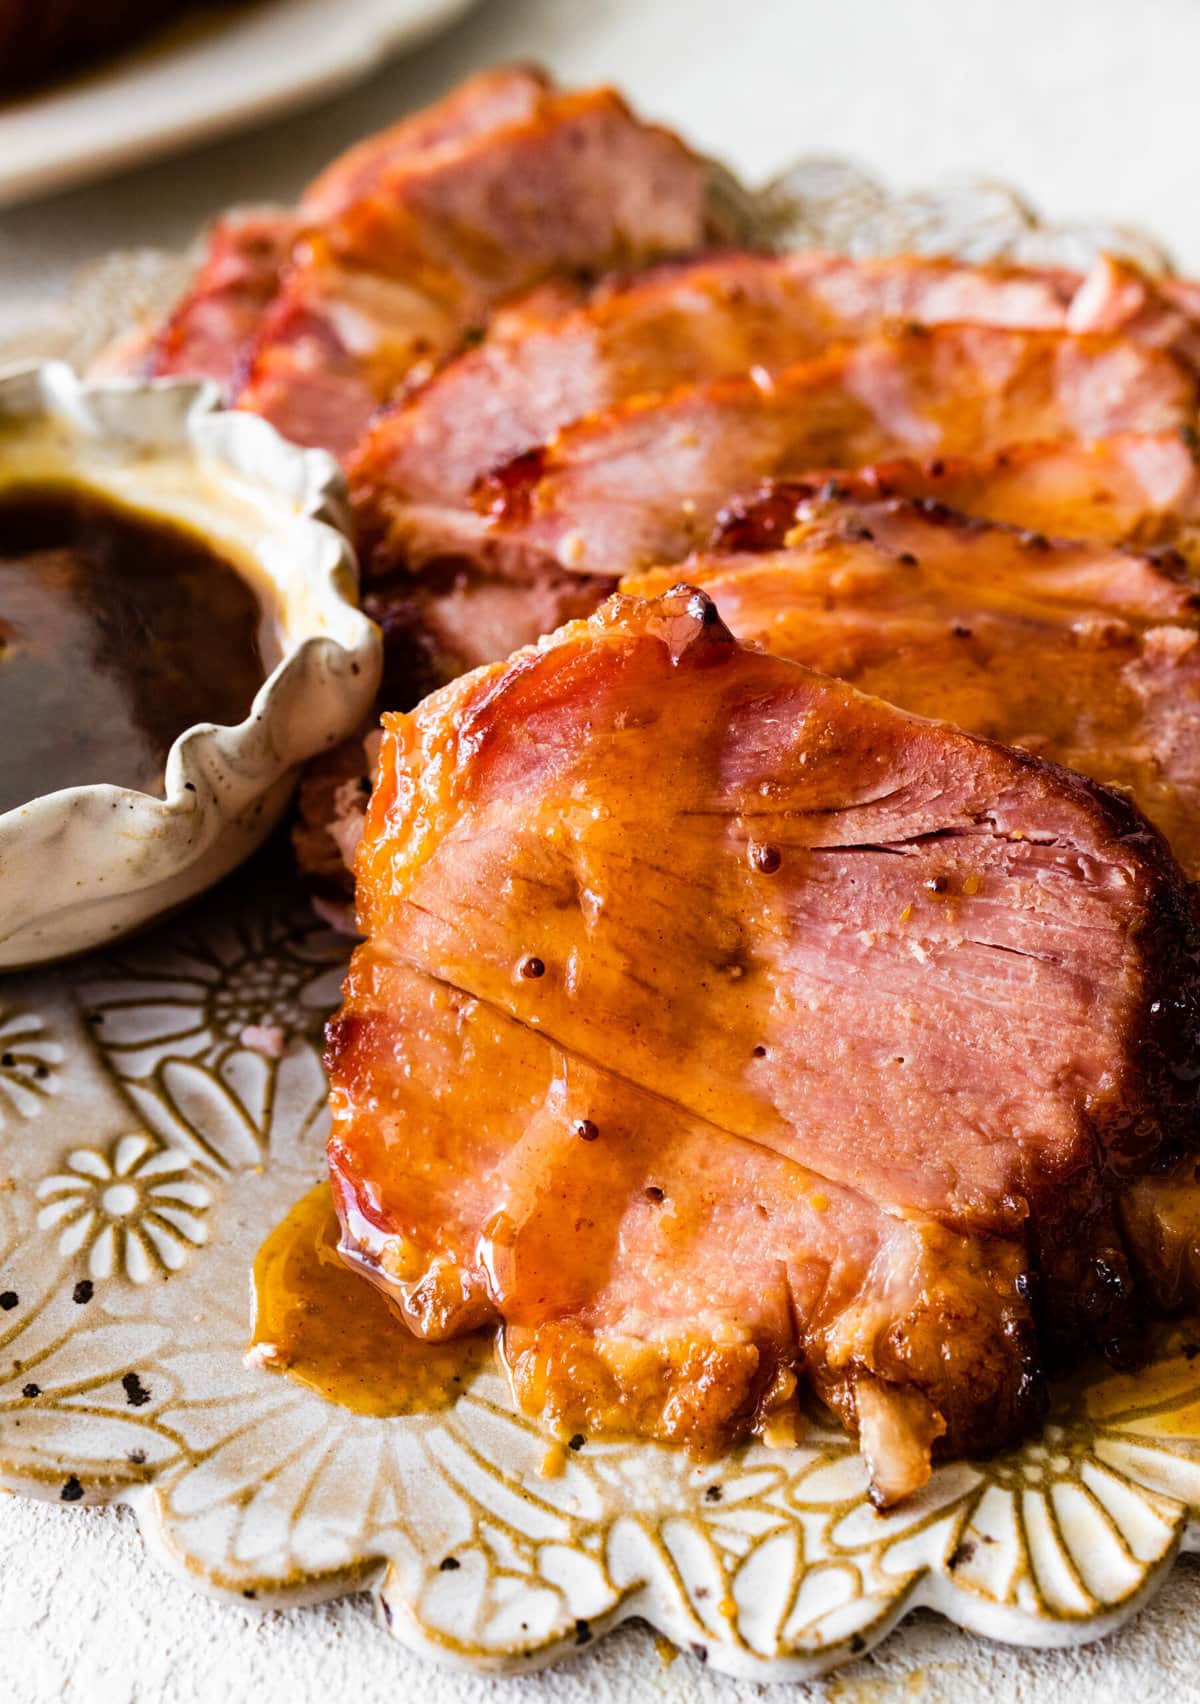 slices of baked ham on a serving platter with brown sugar glaze on the side.